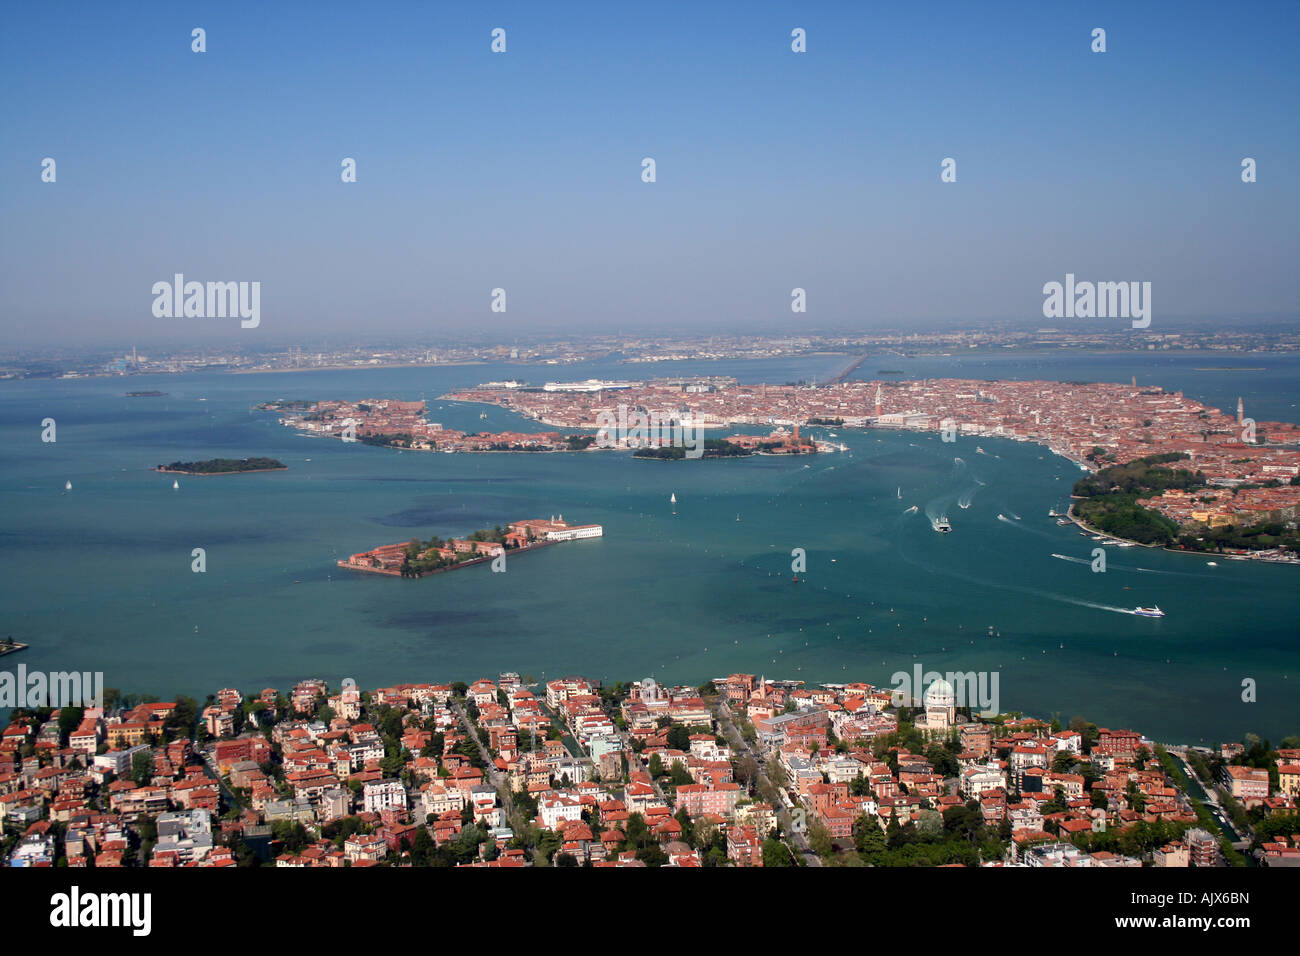 Venice Lido, the lagoon and the Italian city of Venice, seen from the air Stock Photo